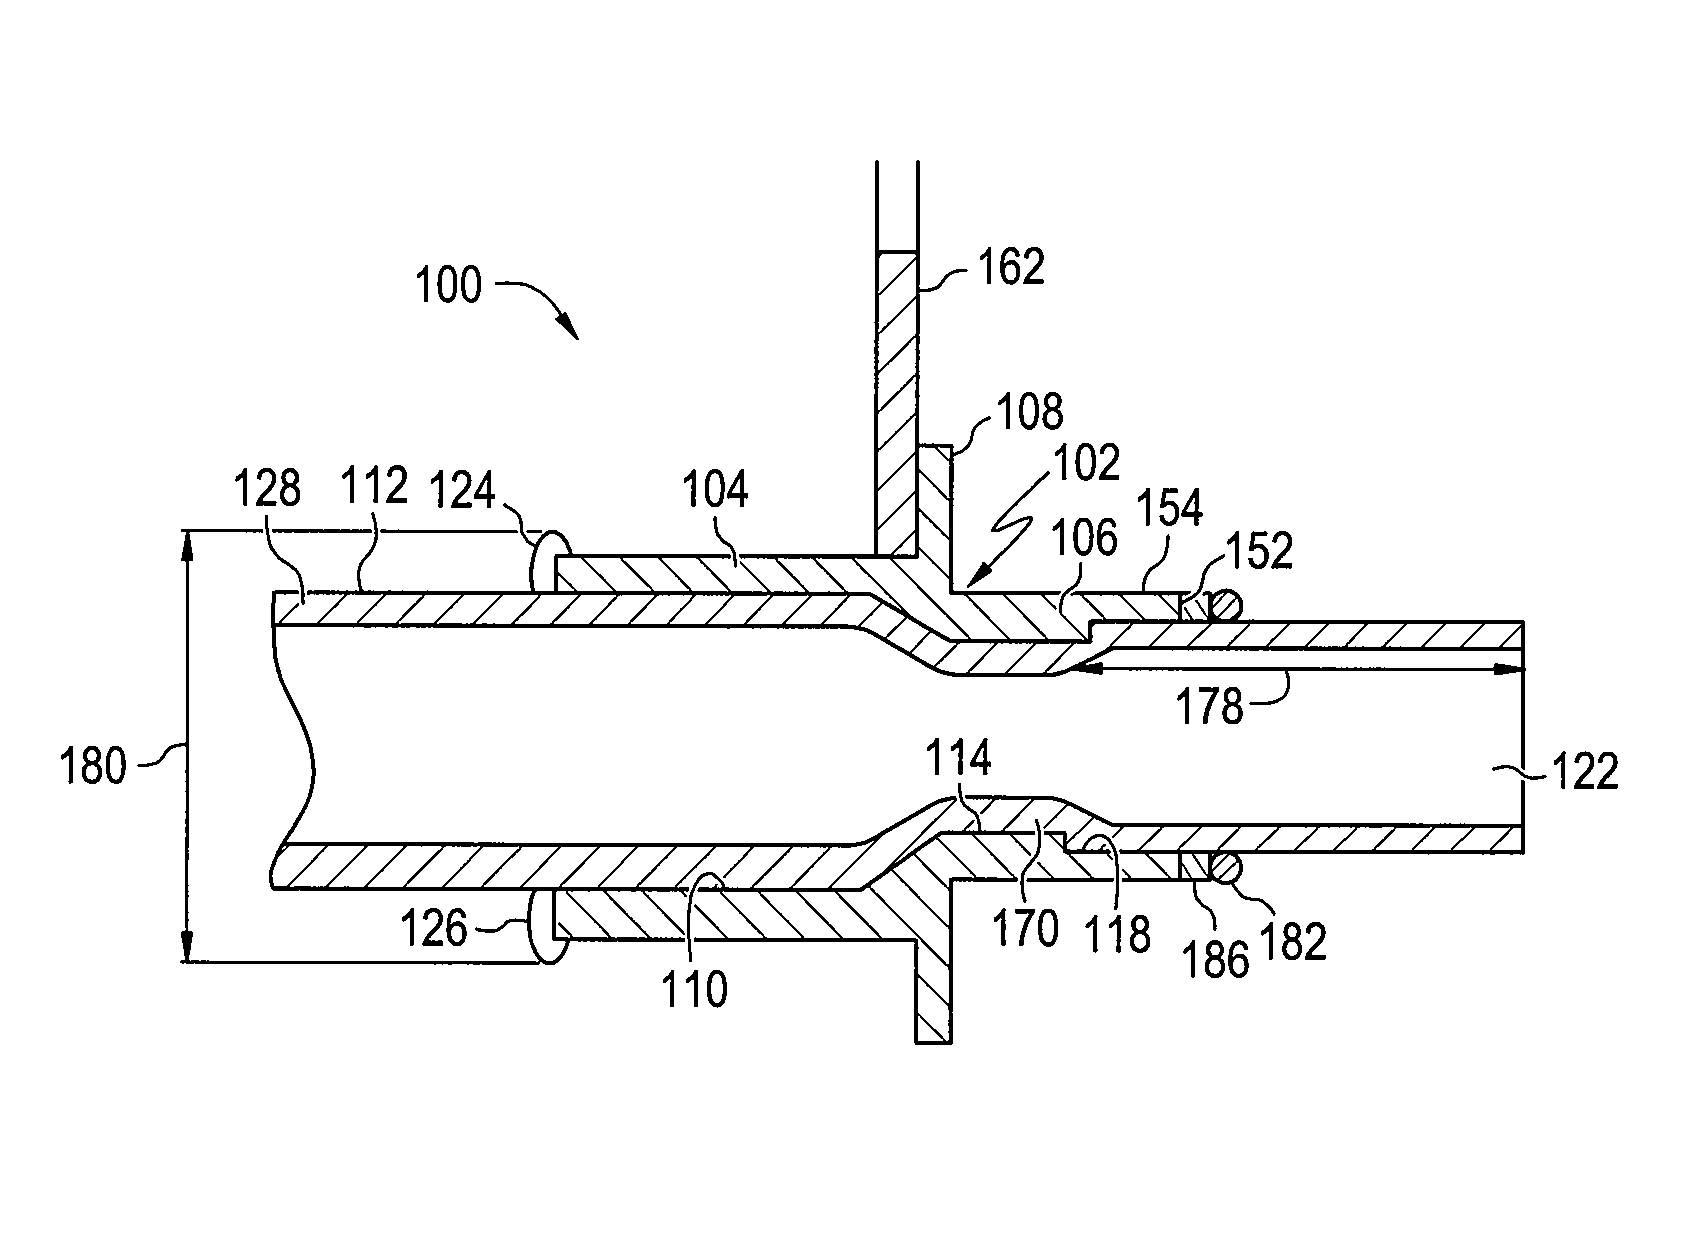 Process of endforming a tubular assembly